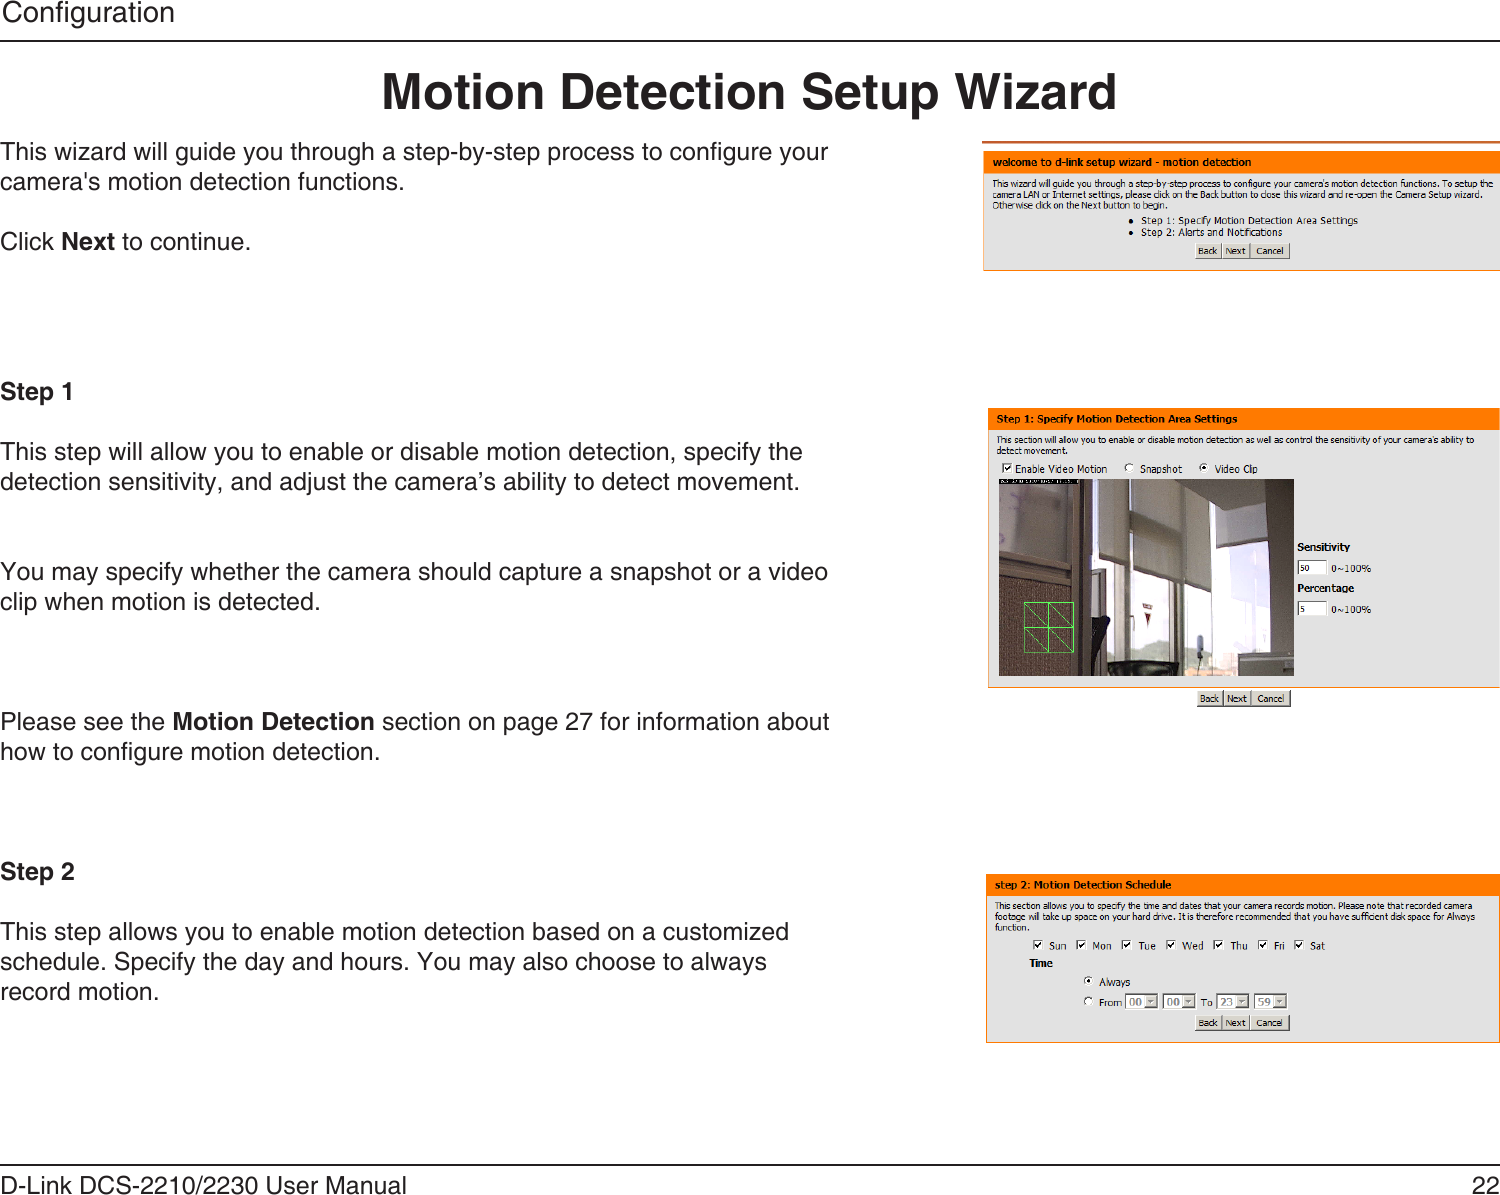 22D-Link DCS-2210/2230 User ManualCongurationThis wizard will guide you through a step-by-step process to congure your camera&apos;s motion detection functions.Click Next to continue.Step 1This step will allow you to enable or disable motion detection, specify the detection sensitivity, and adjust the camera’s ability to detect movement.You may specify whether the camera should capture a snapshot or a video clip when motion is detected.Please see the Motion Detection section on page 27 for information about how to congure motion detection.Step 2This step allows you to enable motion detection based on a customized schedule. Specify the day and hours. You may also choose to always record motion.Motion Detection Setup Wizard